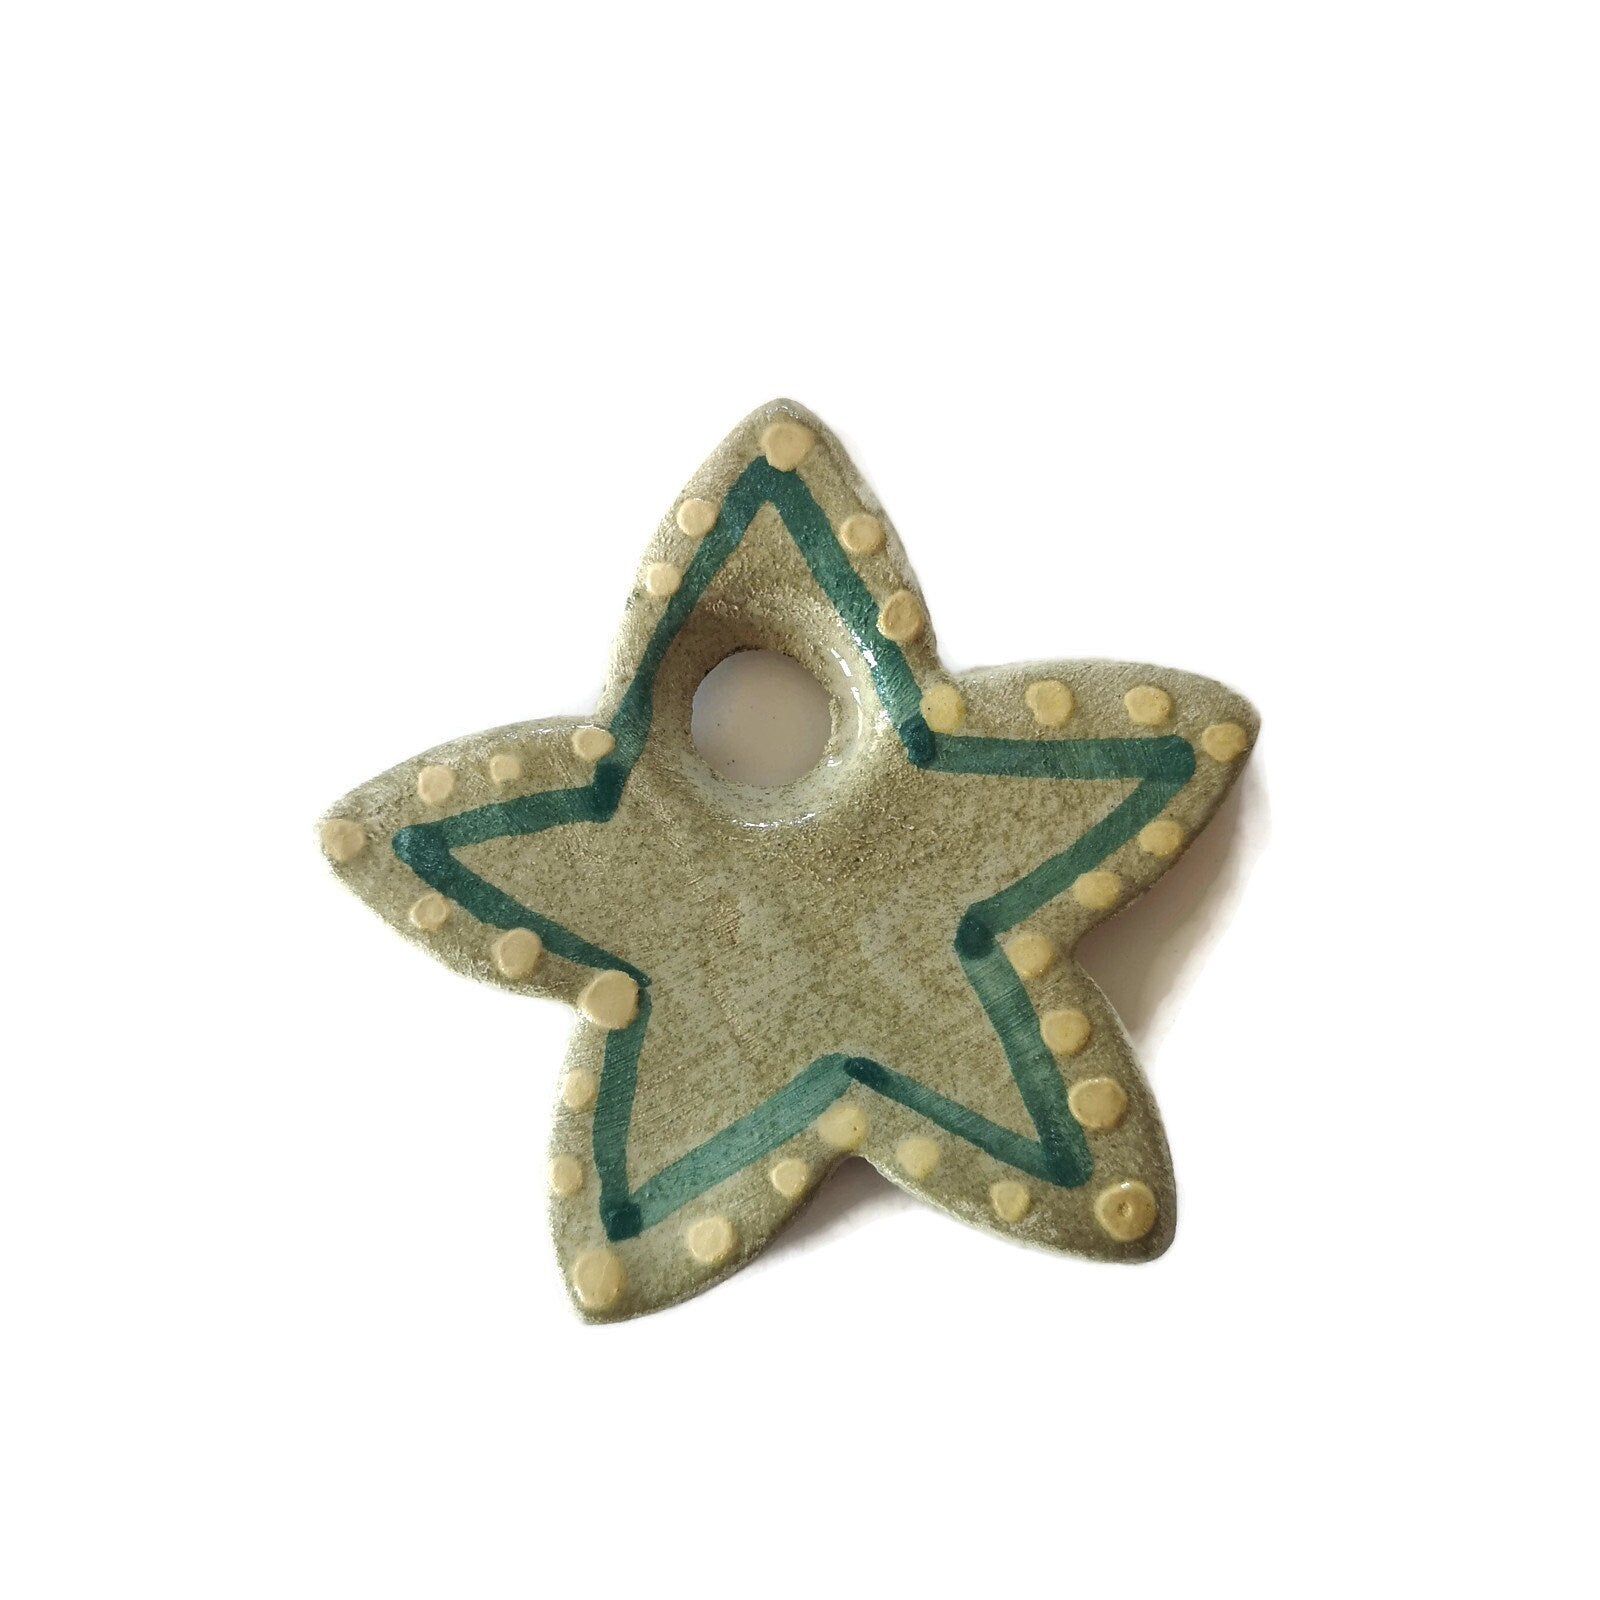 1Pc Extra Large 60mm Green Star Handmade Ceramic Necklace Pendant for Unique Jewelry Making, Hand Painted Clay Charms For Women Fashion - Ceramica Ana Rafael